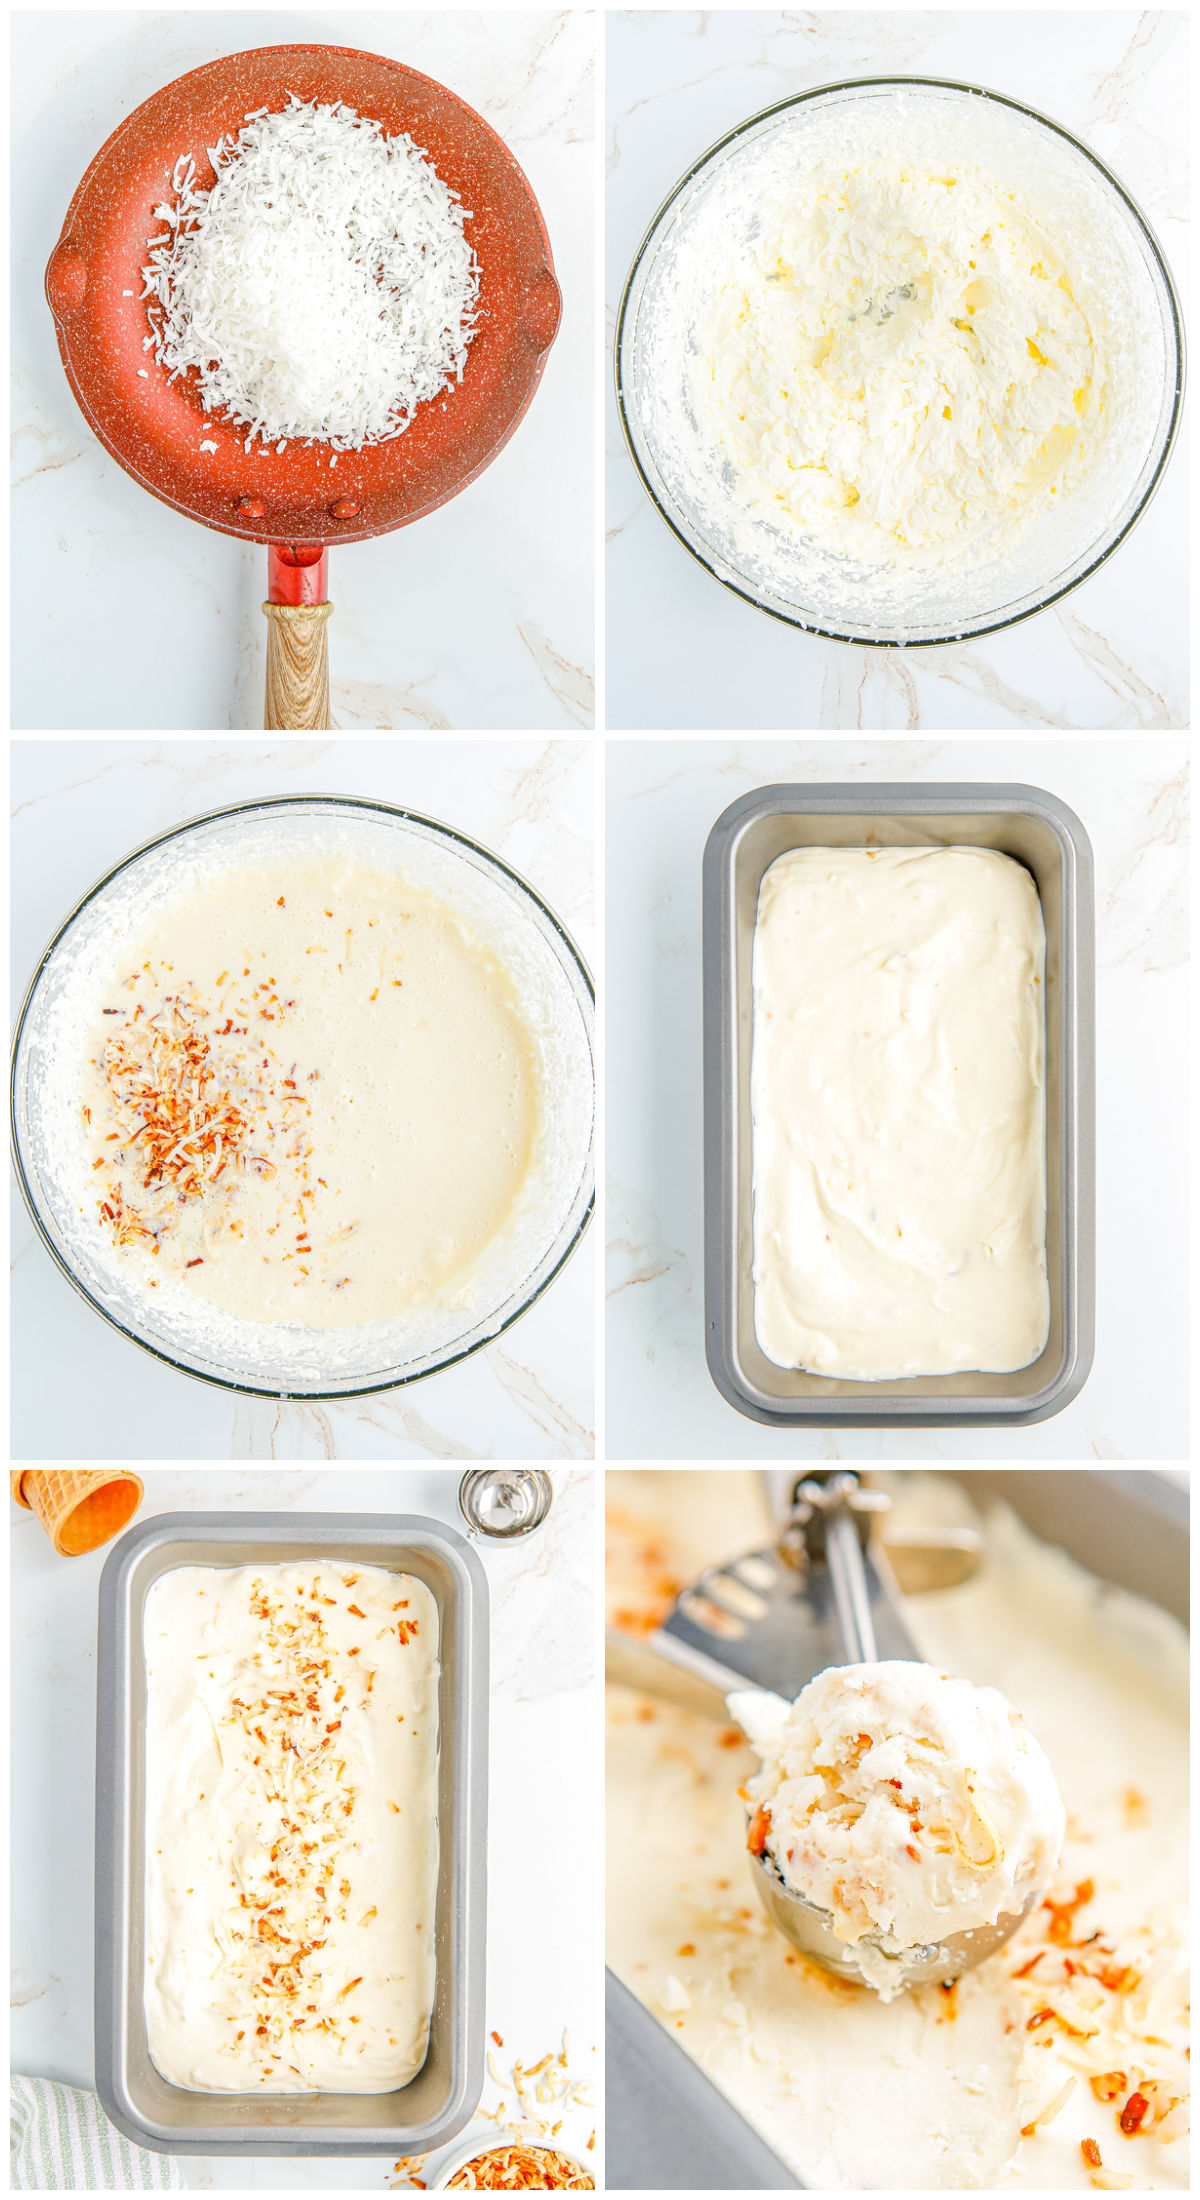 A picture collage showing how to make this Toasted Coconut Ice Cream recipe.